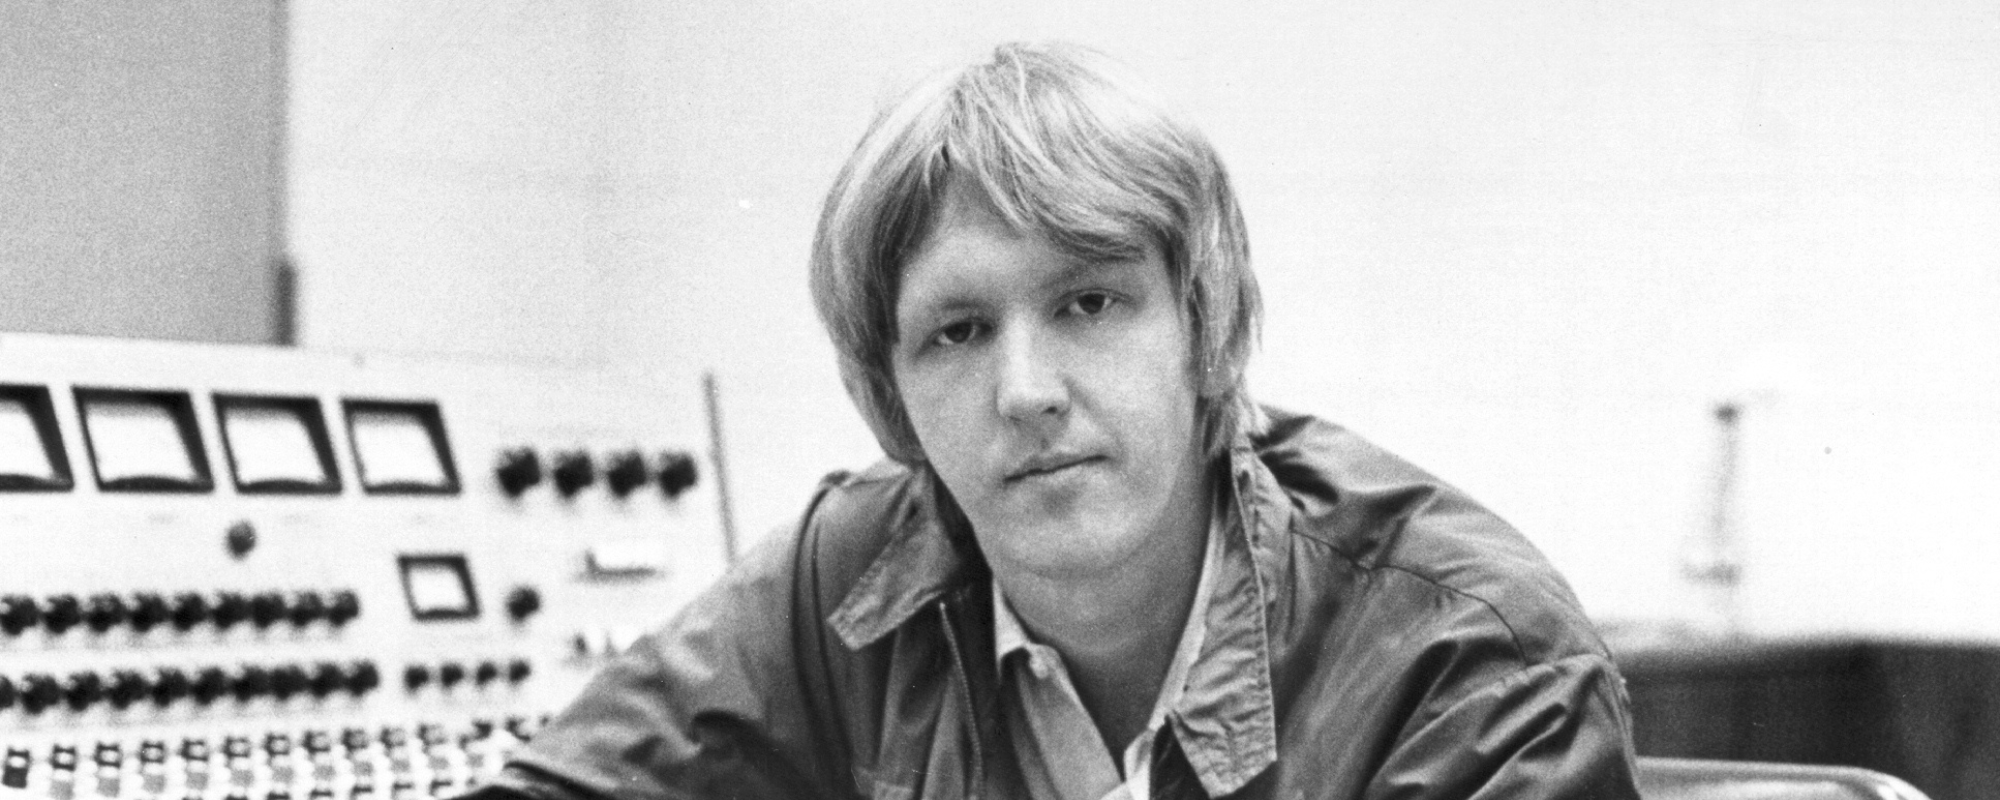 7 Fascinating Harry Nilsson Facts That Barely Even Touch on the Two Music Legends Who Died in His Bed